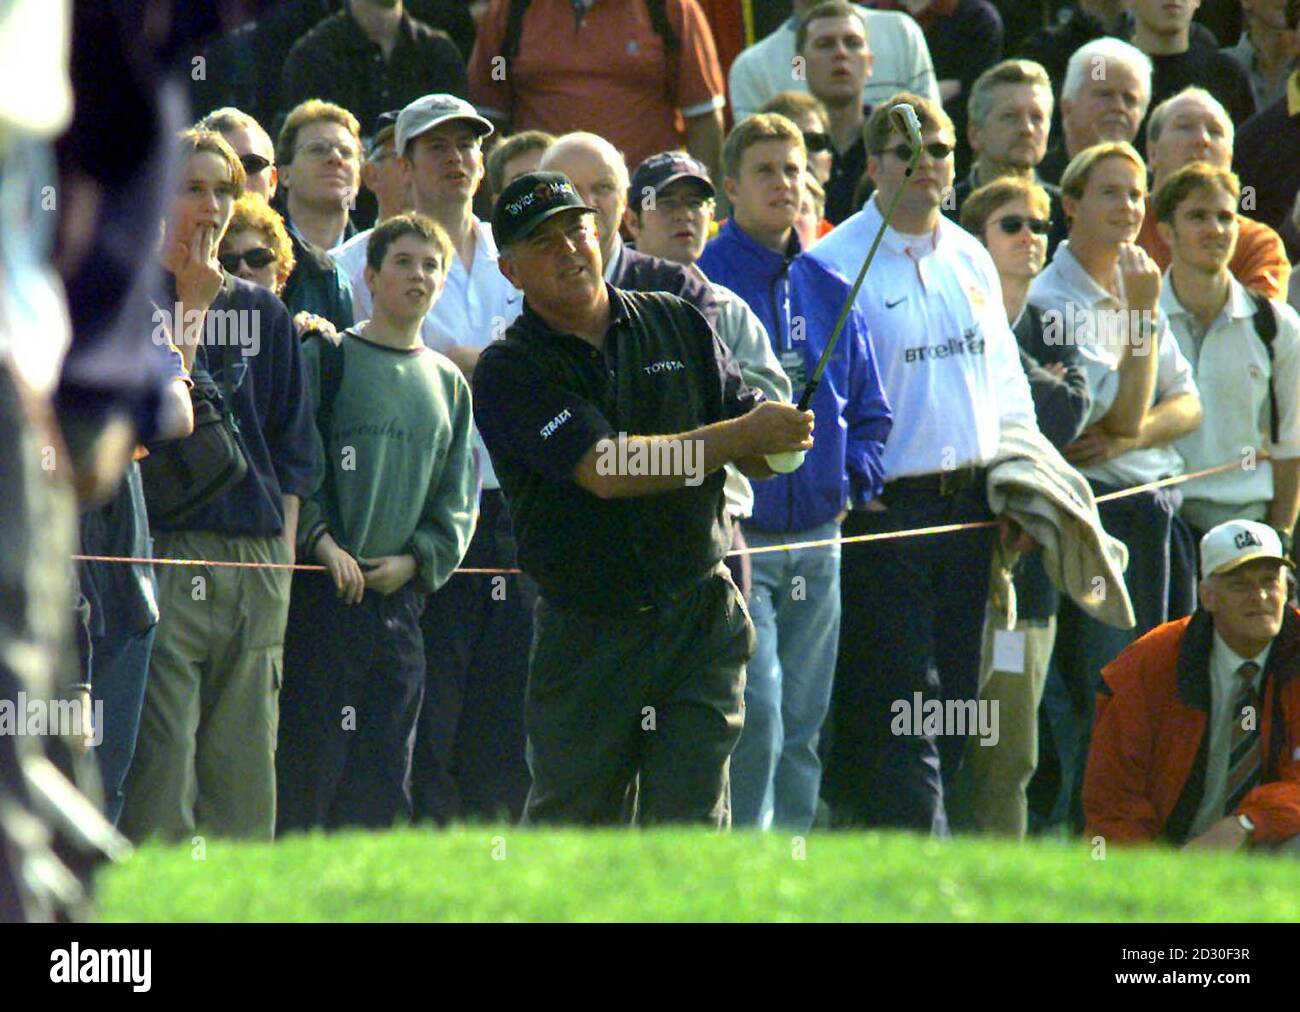 American Mark O'Meara on the 11th fairway watches his ball after shooting out of the rough while playing against Zimbabwean Nick Price, during the afternoon session of his semi final match in the Cisco World Match Play golf Championship at Wentworth. Stock Photo